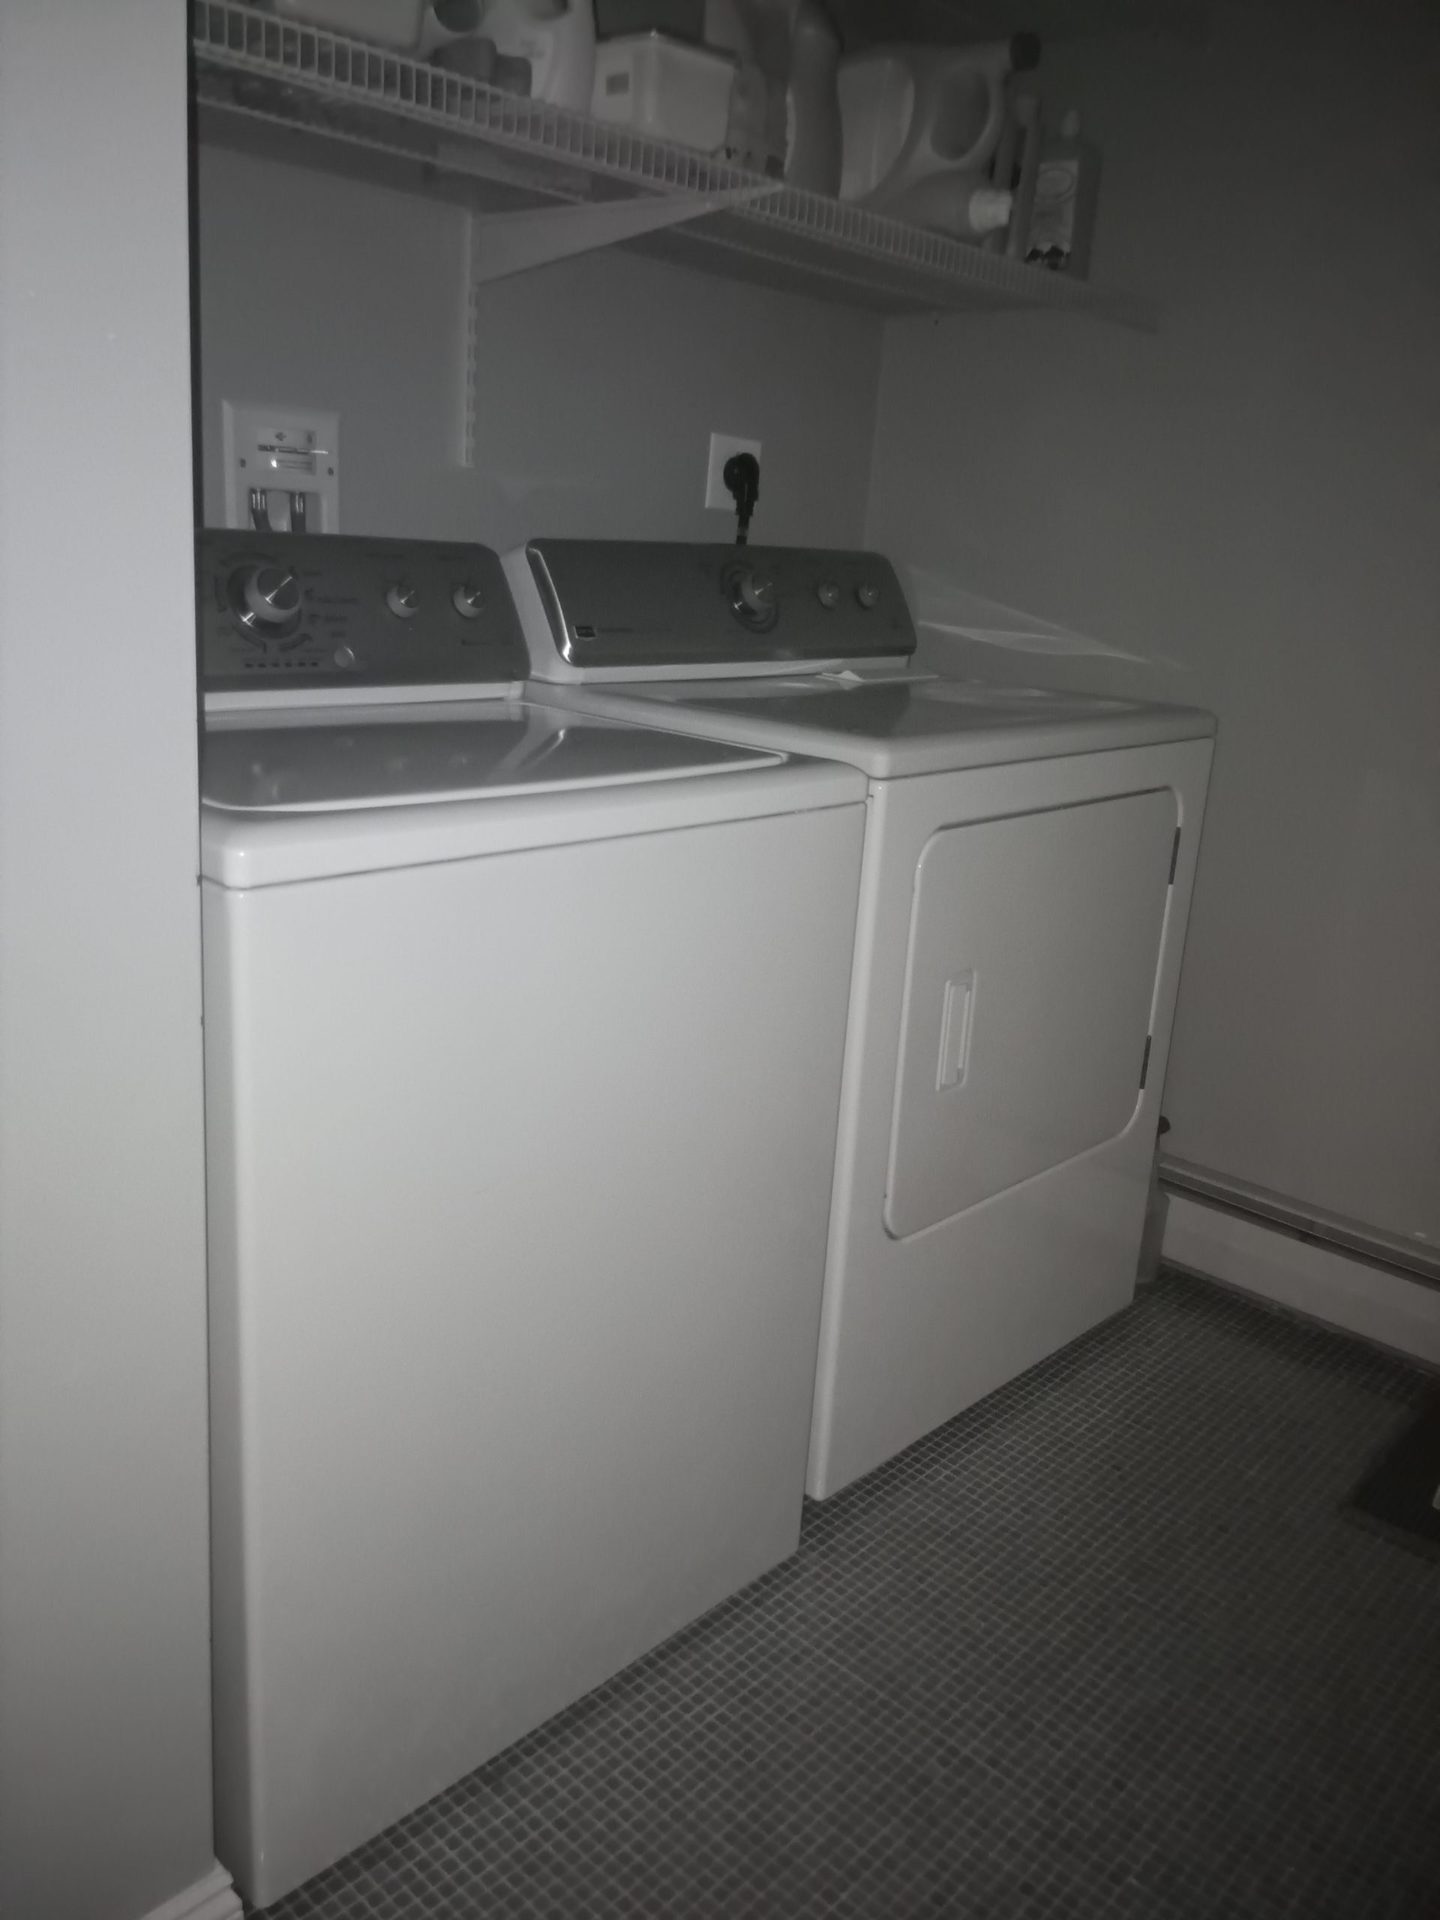 Ulefone Armor 11 5G Night Vision Camera Sample showing a washer and dryer in a laundry room.